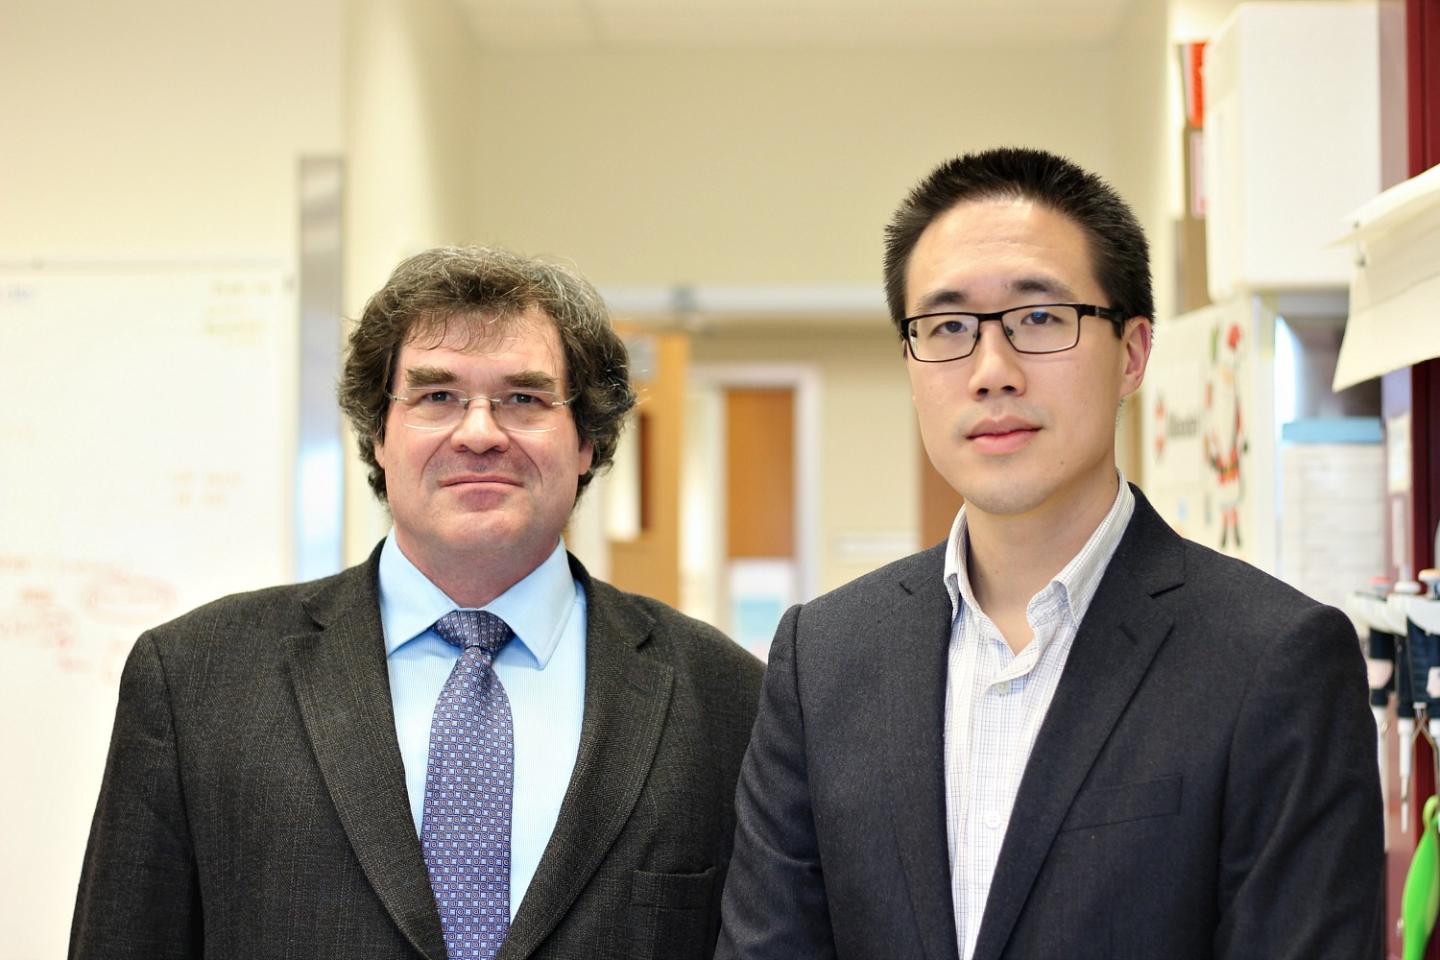 Drs. Michael Sawyer and Michael Chu, University of Alberta Faculty of Medicine & Dentistry